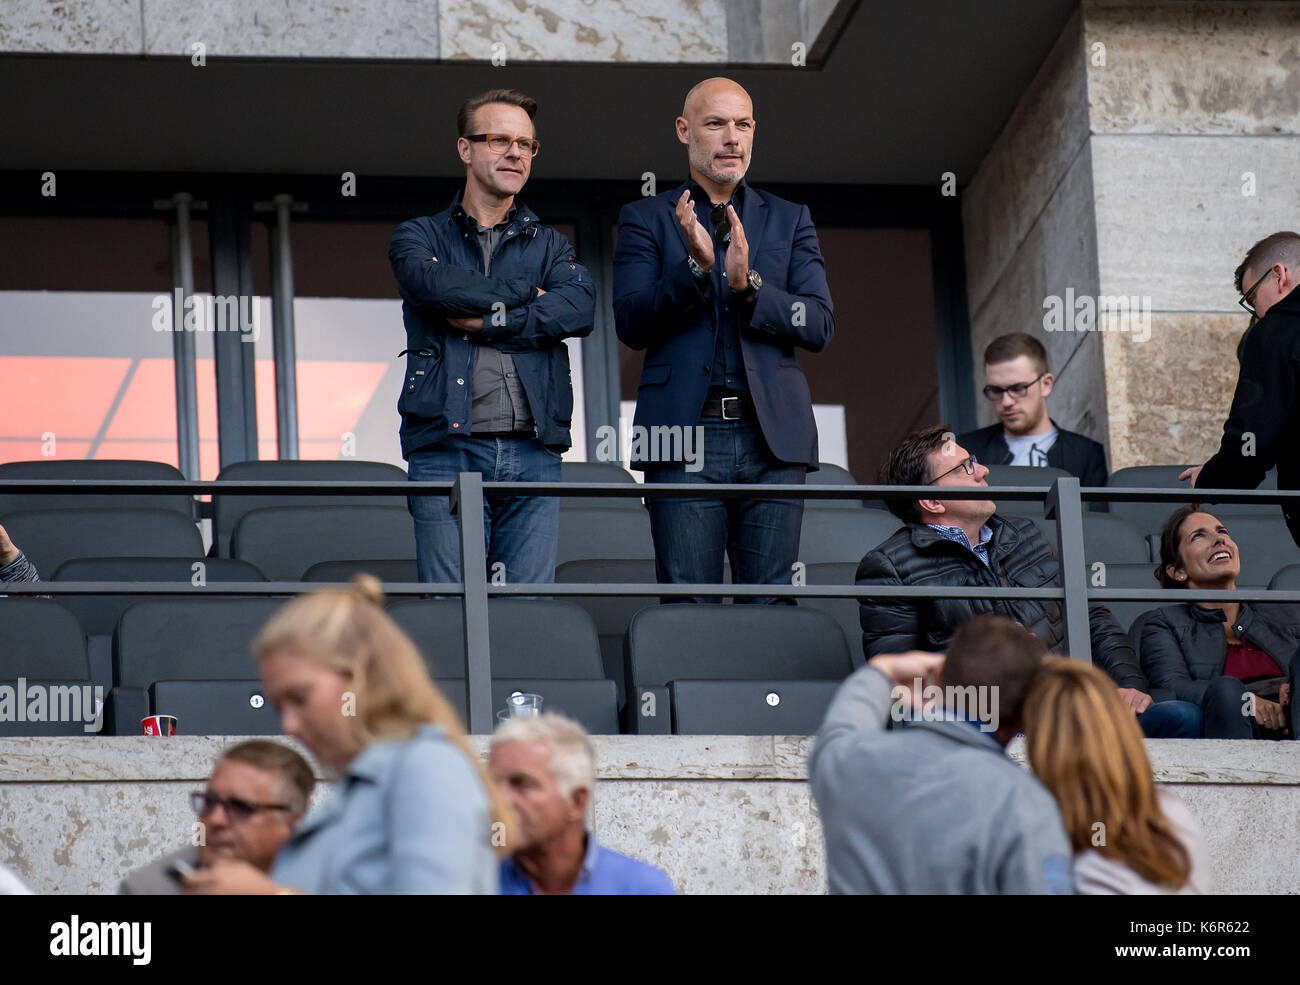 Berlin, Germany. 10th Sep, 2017. Referee Bibiana Steinhaus has her first Bundesliga match, her partner, the former British referee Howard Webb (C), watches from the stands during the German Bundesliga soccer match between Hertha BSC and Werder Bremen at the Olympia stadium in Berlin, Germany, 10 September 2017. Next to him former referee and Sky expert Peter Gagelmann can be seen. Photo: Thomas Eisenhuth/dpa-Zentralbild/ZB/dpa/Alamy Live News Stock Photo